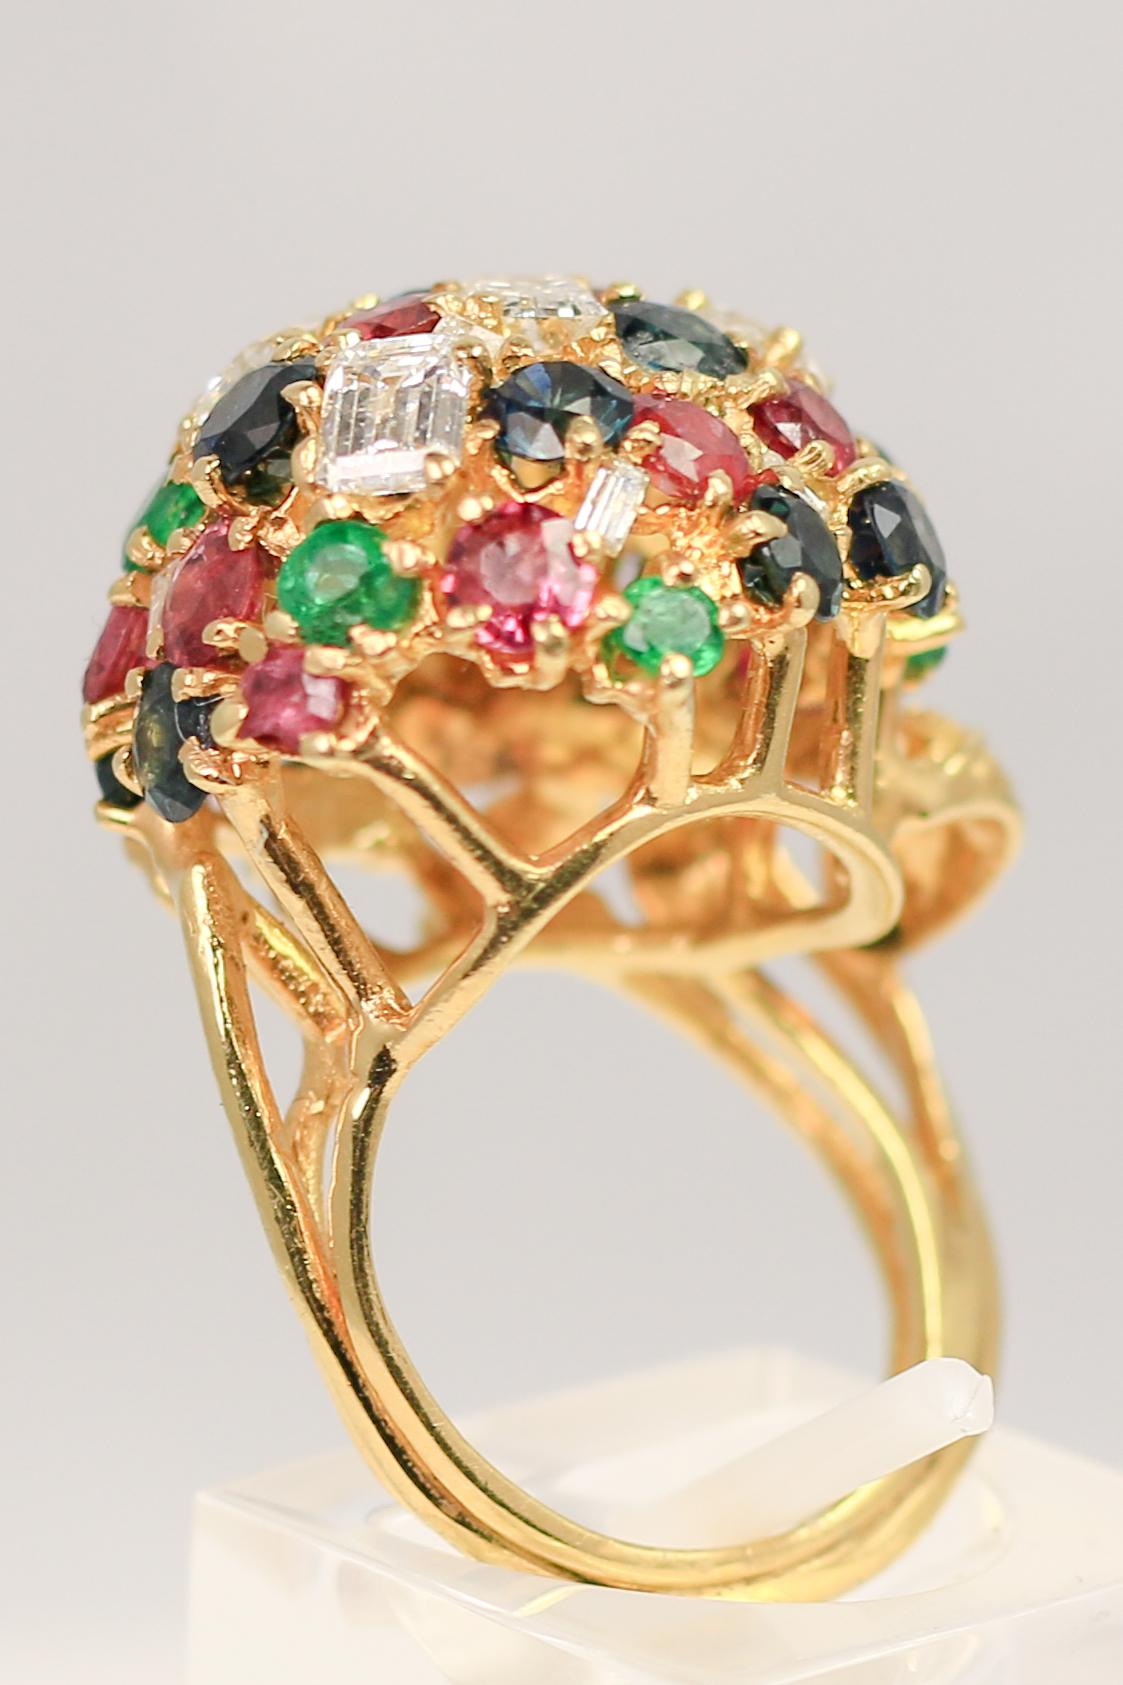 This 18k gold ring is packed with 1.20cts of Diamonds and 3.5cts of color. The ring, designed to resemble a blackberry, is a statement piece, perfect for the lively gal looking to celebrate and revel in the fruits of life with an elegant statement